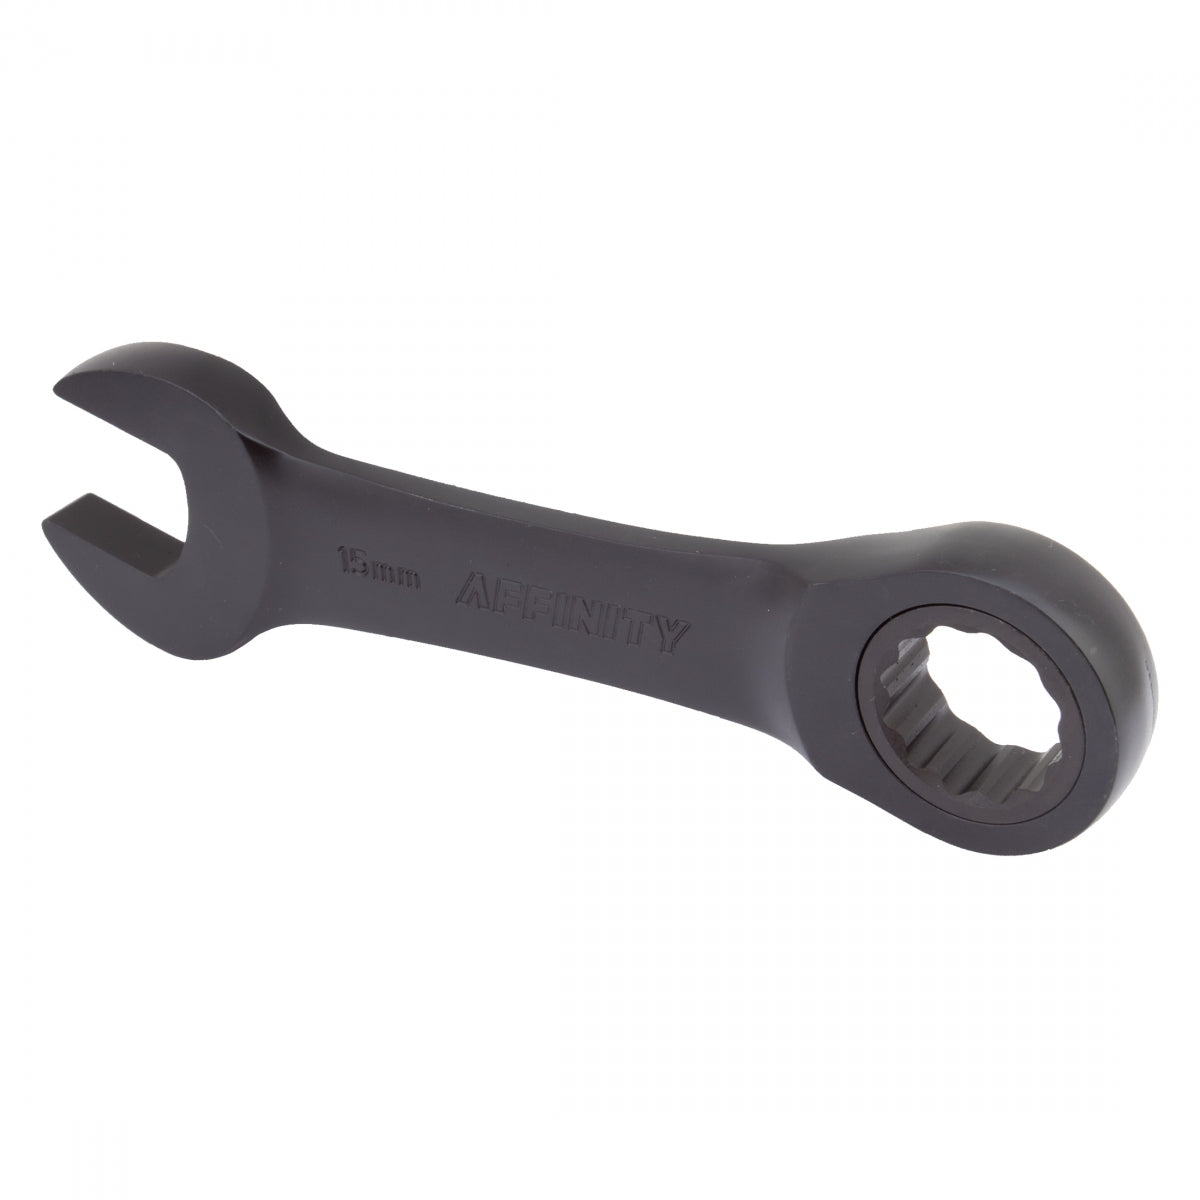 Tool Pedal Wrench Affinity Slim Combo 15Mm-Box/Open-End Short Bk